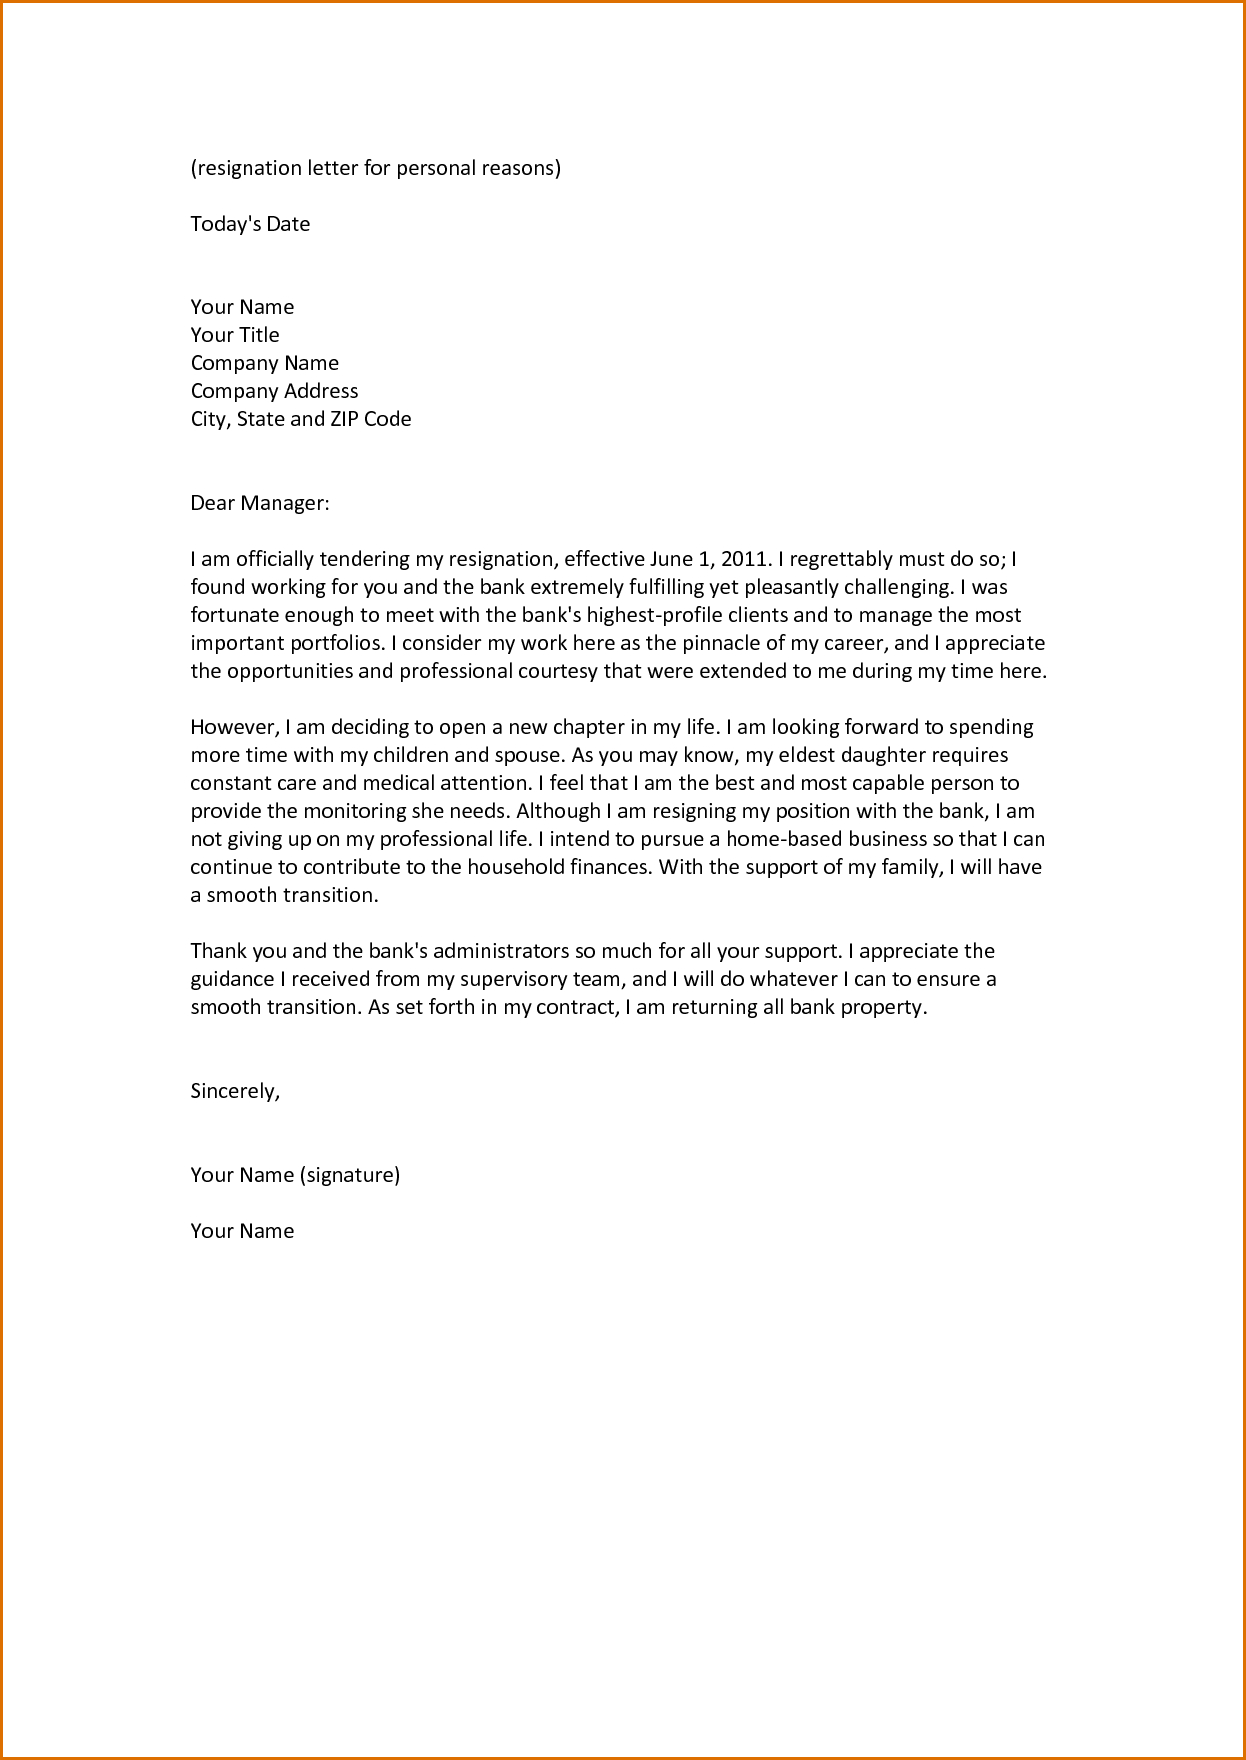 immediate resignation letter template Collection-Ideas Collection Resignation Letter With Reason Enom Warb In Cover Letter Sample For Resignation of 8-o